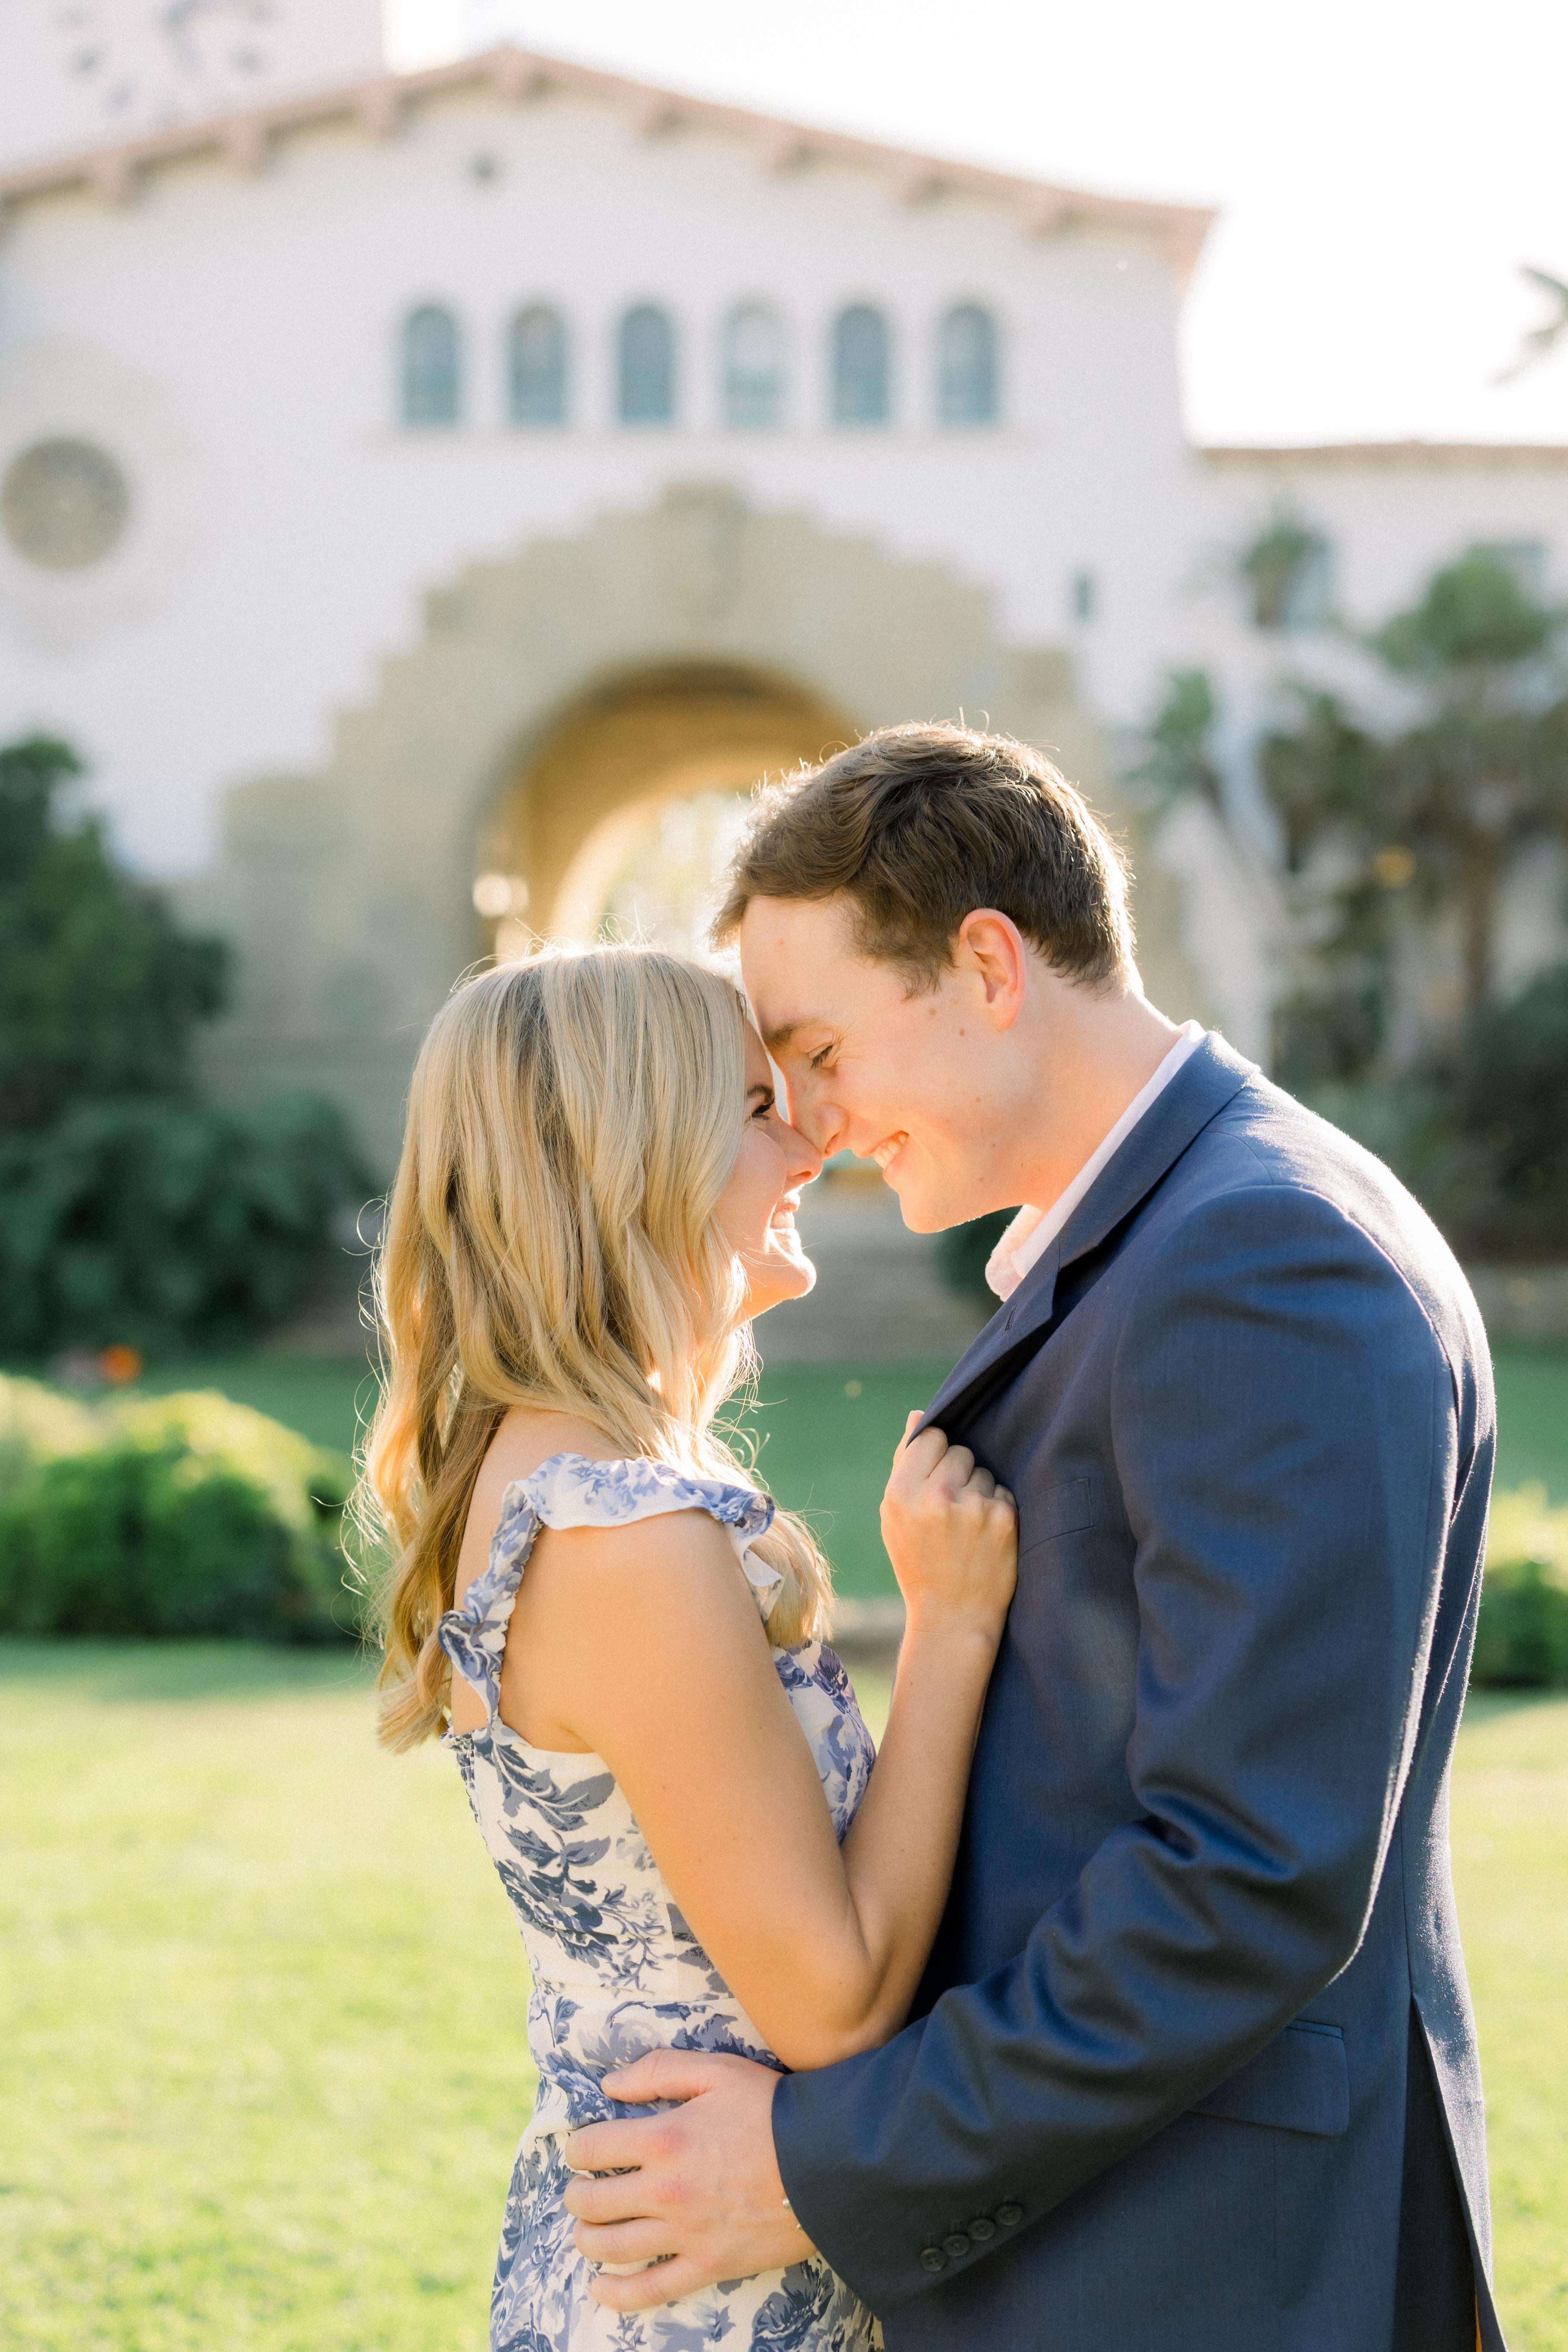 The Wedding Website of Erin Linehan and Kyle Mayfield